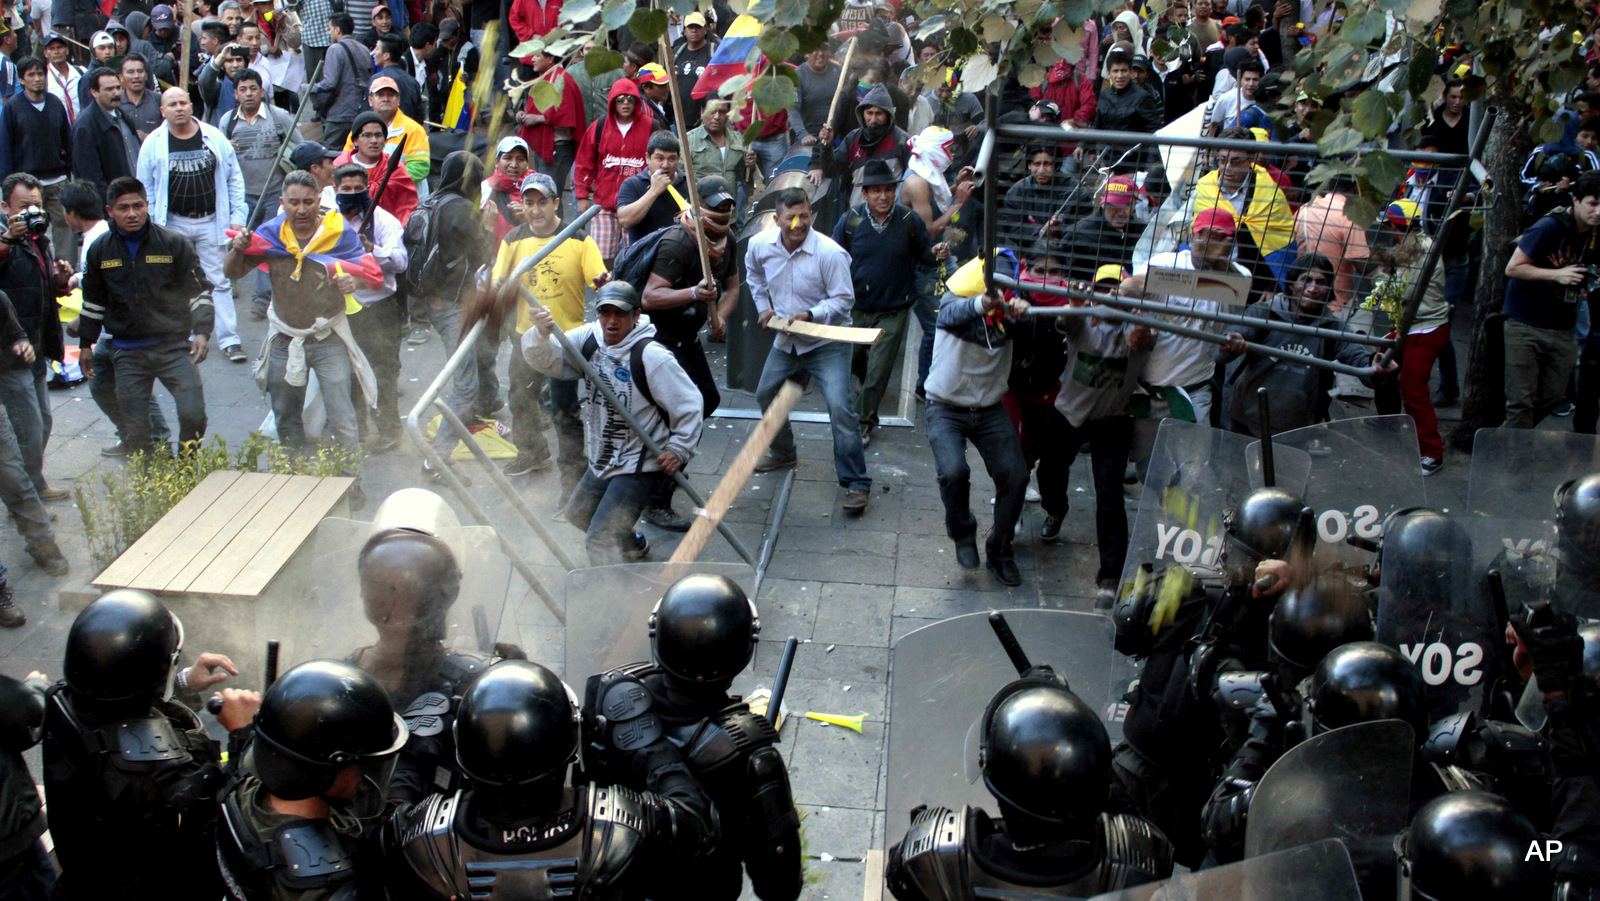 Protesters clash with police near the government palace in Quito, Ecuador